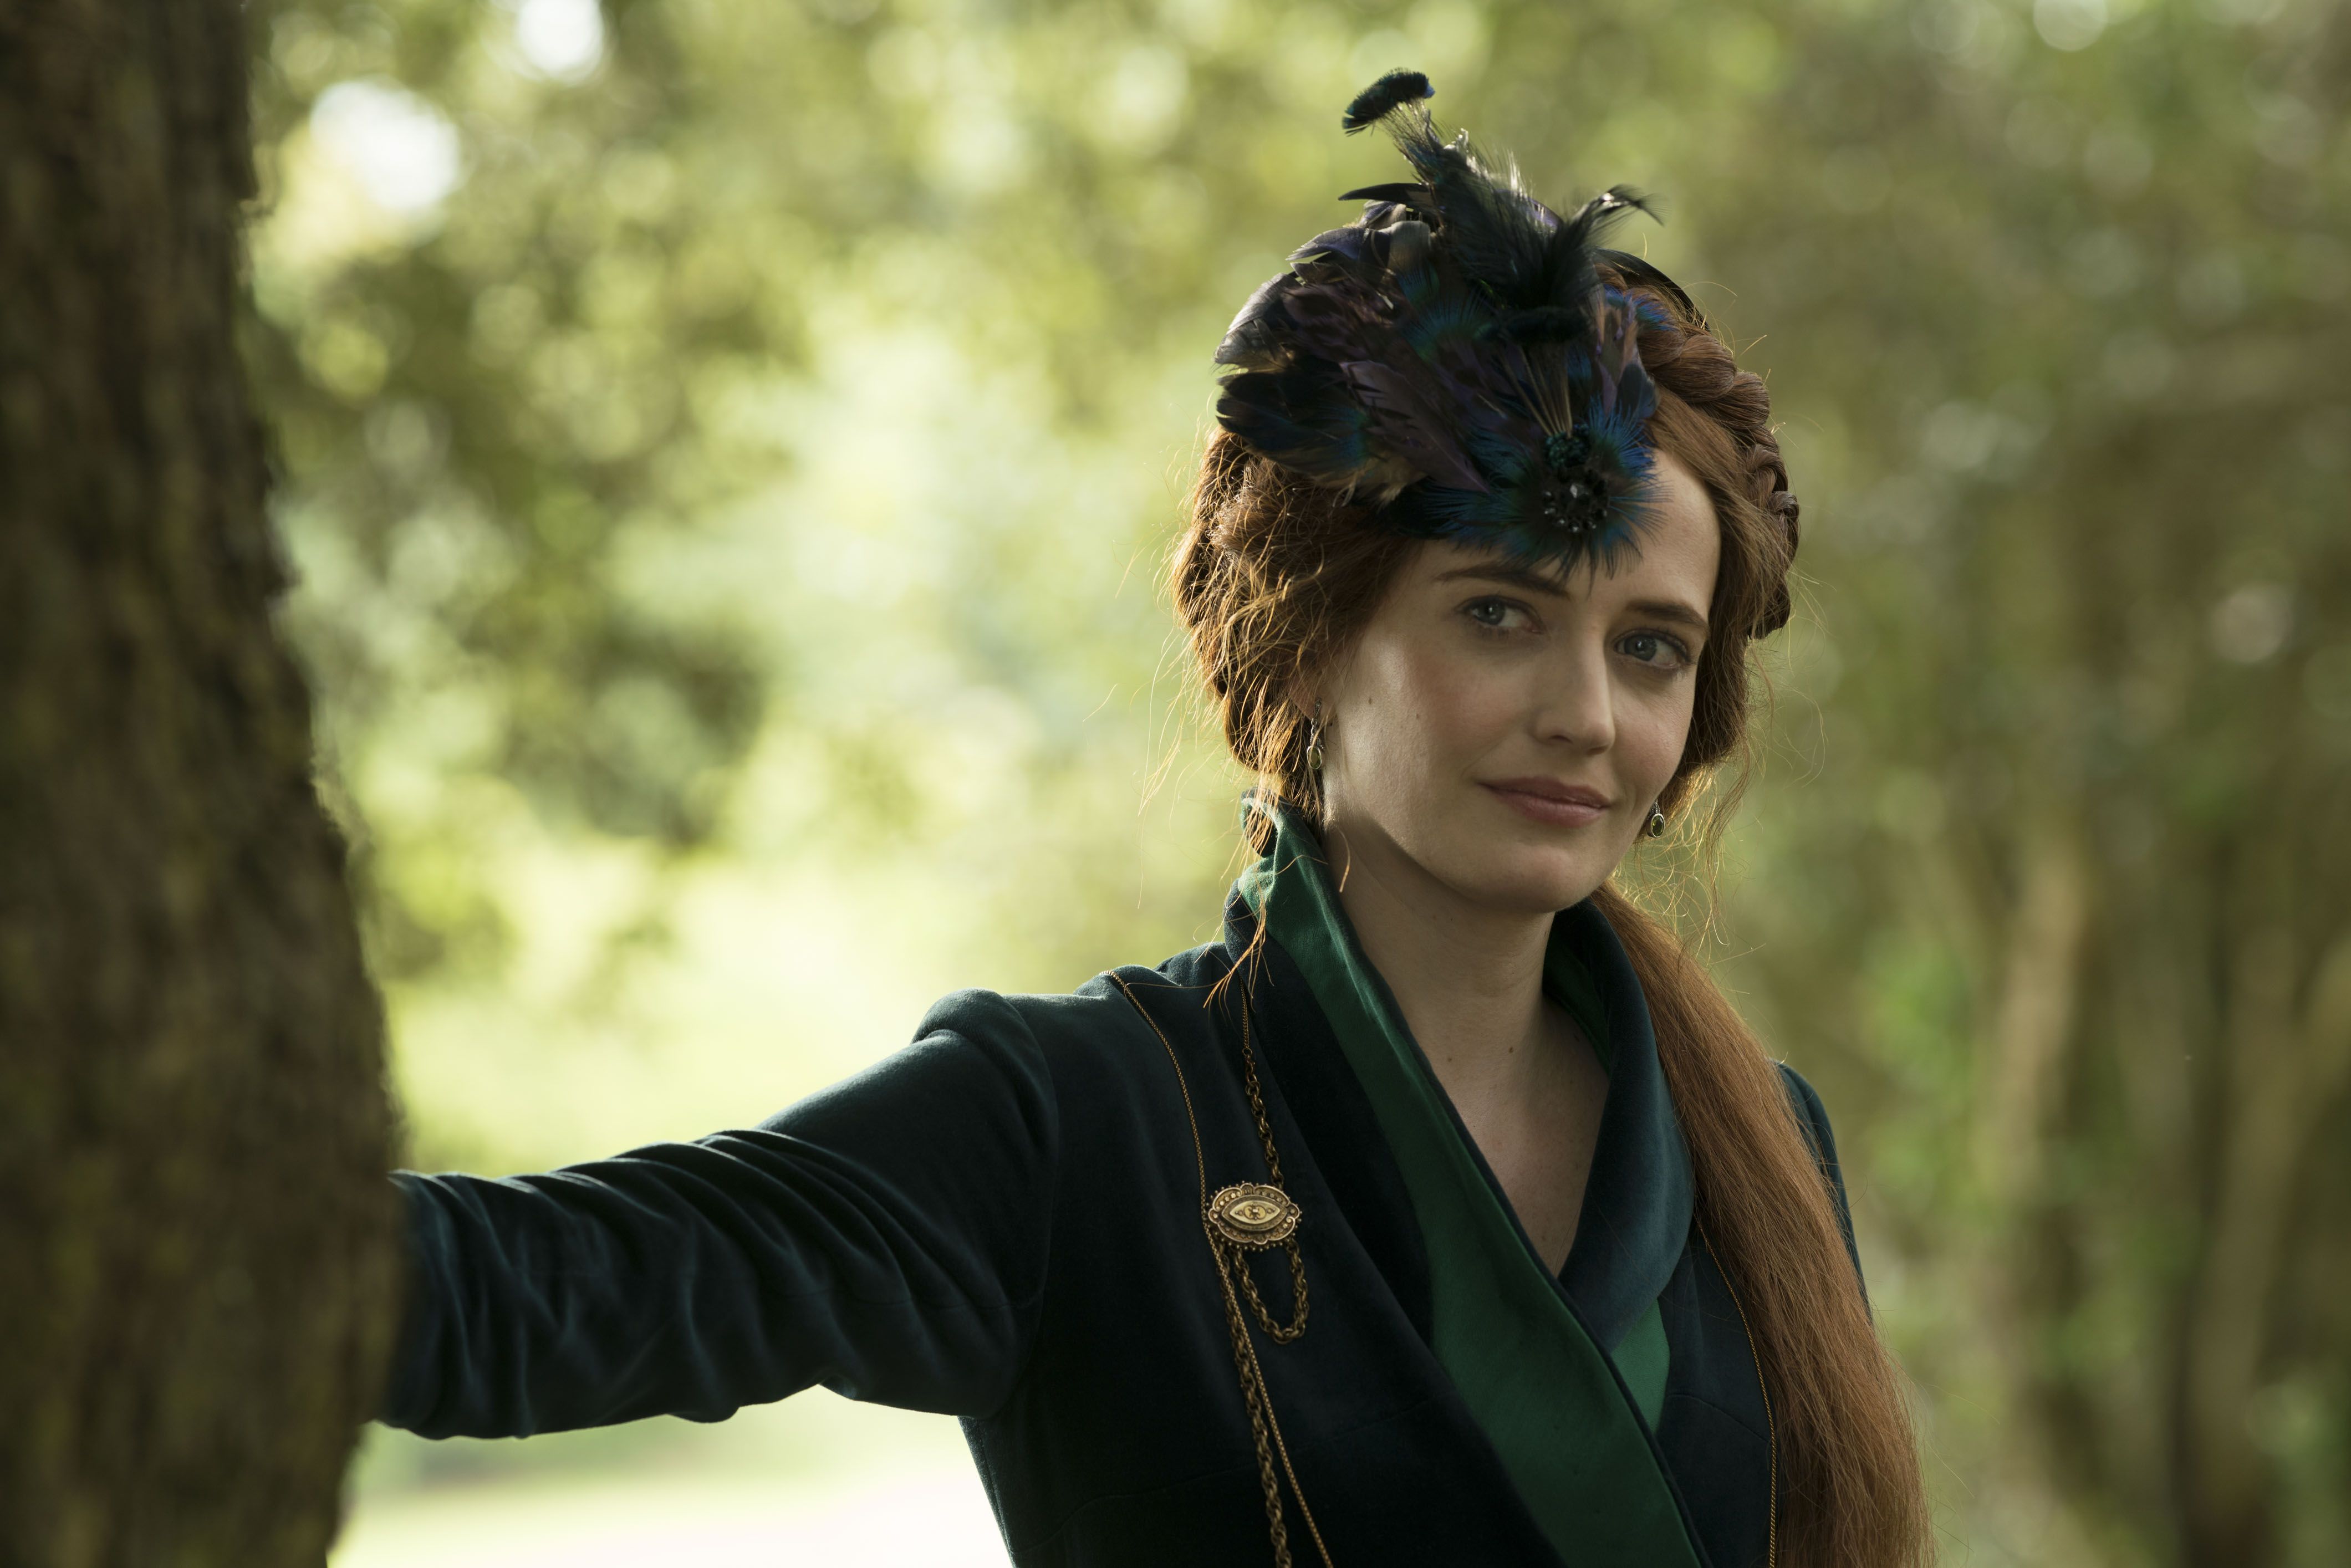 Eva Green pictured in character in The Luminaries